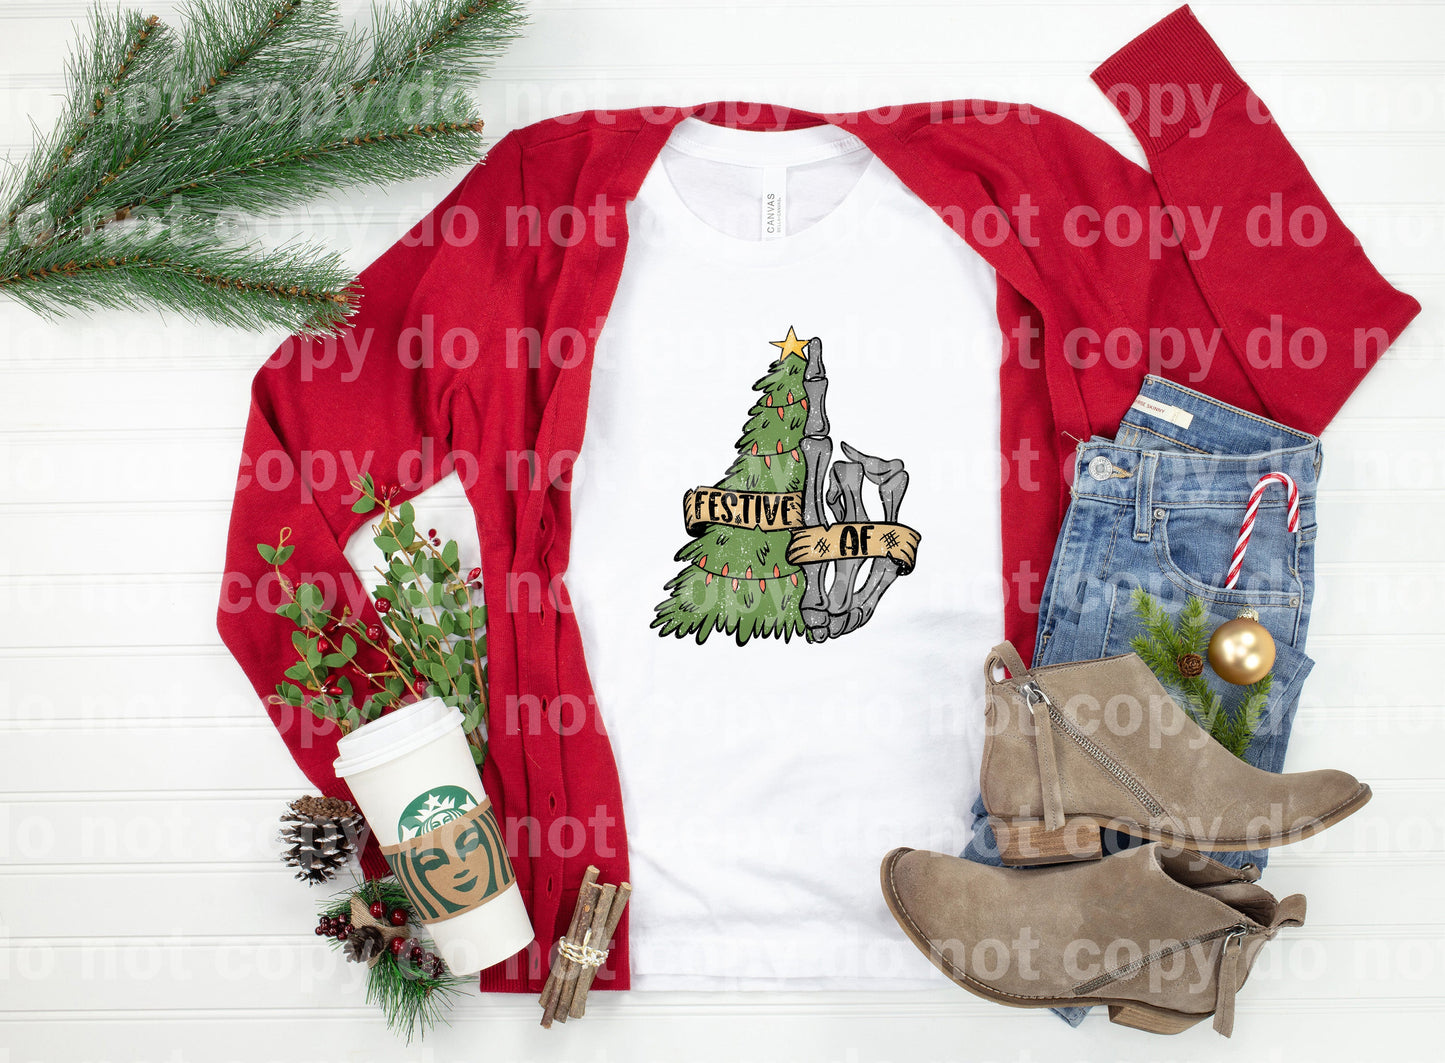 Festive AF Christmas Tree And Skellie Hand Distressed Full Color/One Color Dream Print or Sublimation Print